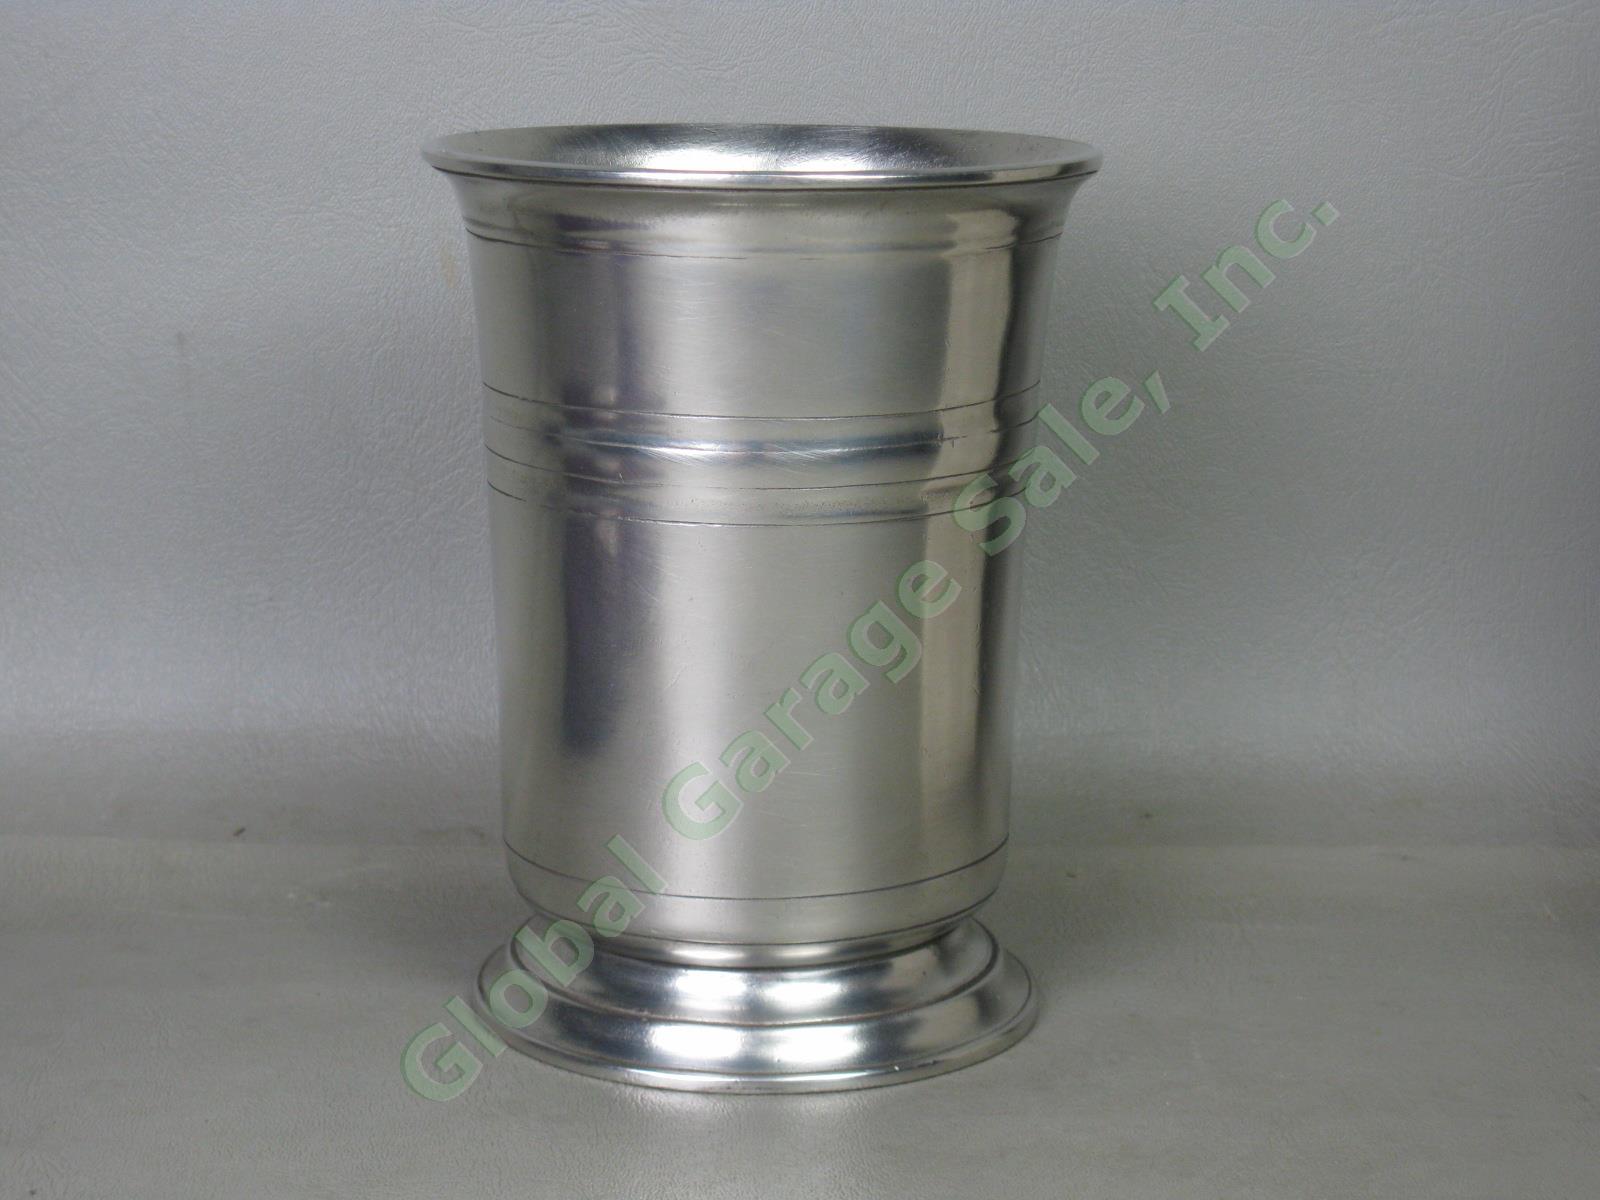 NEW Match Pewter 6.5" Large Tumbler Vase Handmade In Italy Antique Finish NO RES 1